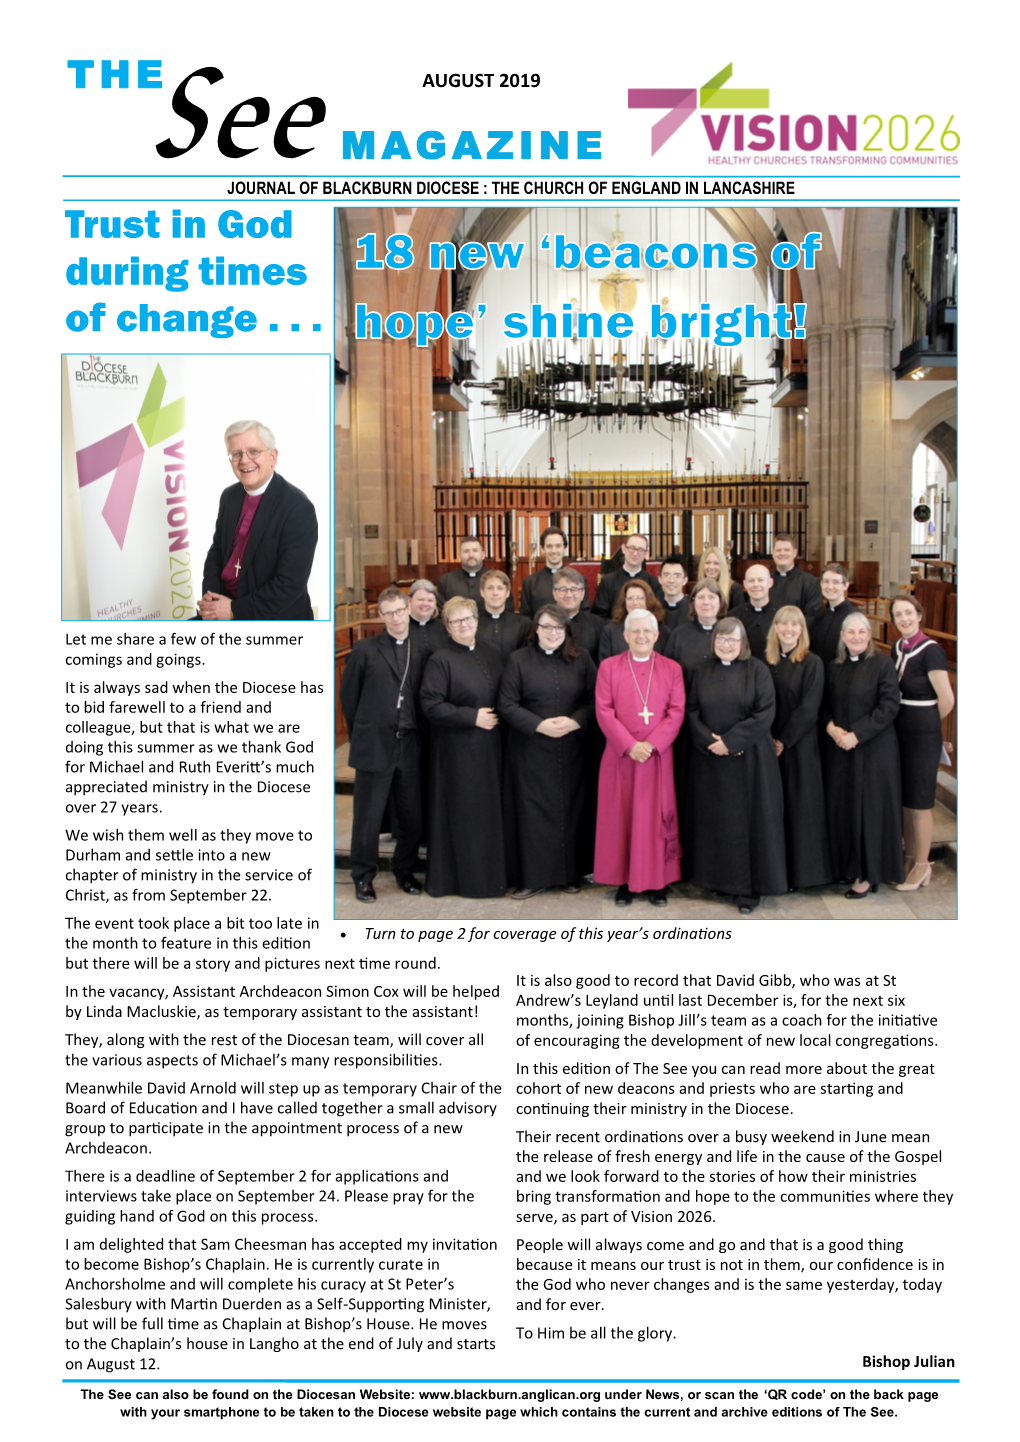 AUGUST 2019 See MAGAZINE JOURNAL of BLACKBURN DIOCESE : the CHURCH of ENGLAND in LANCASHIRE Trust in God During Times of Change